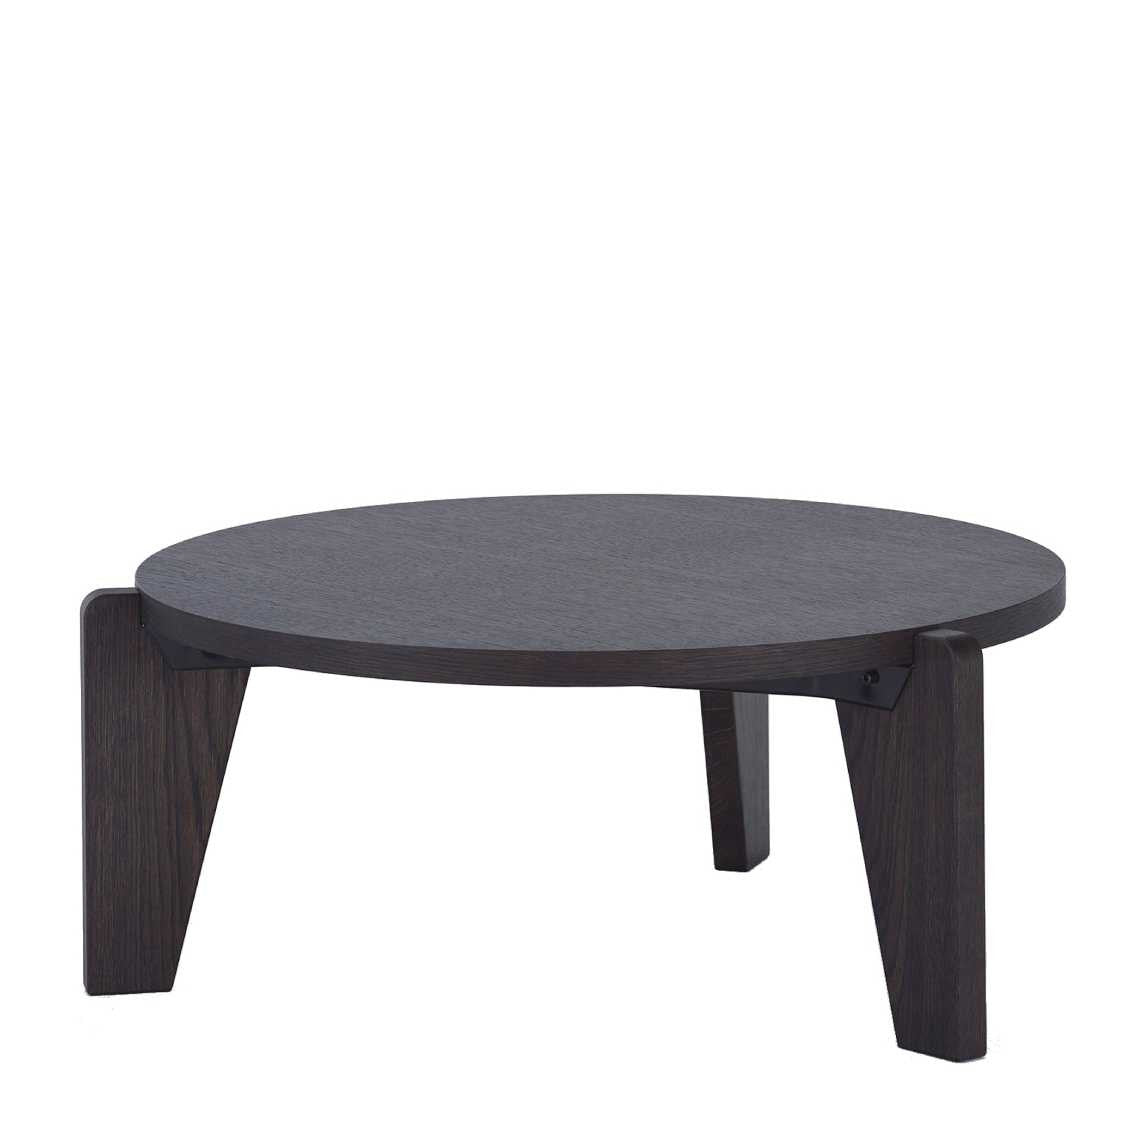 Vitra Eames Segmented round dining table